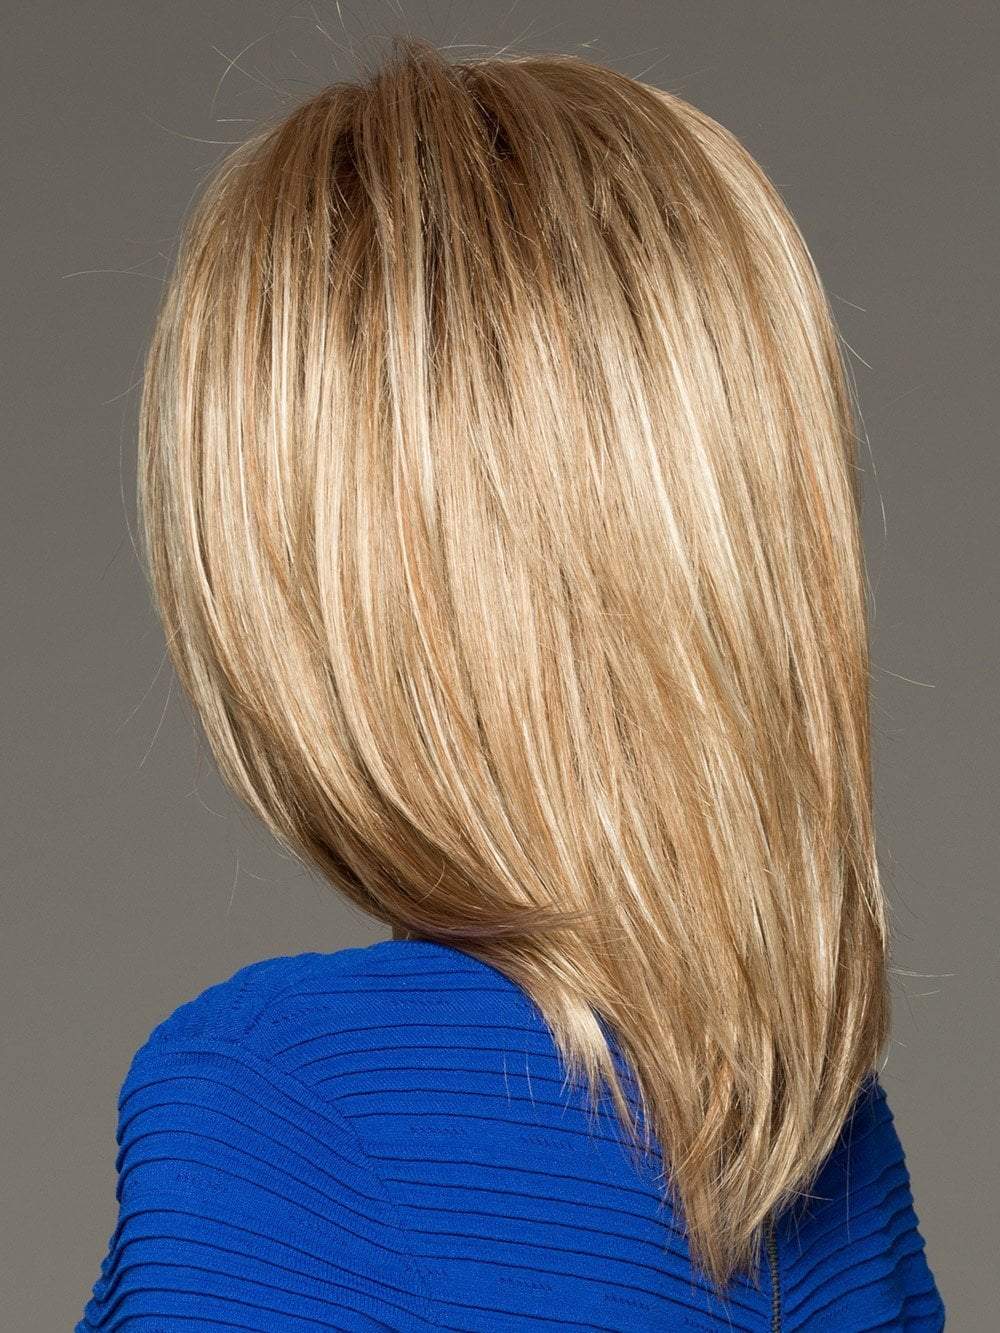 JACKSON by NORIKO in SUGAR CANE R | Rooted Platinum Blonde and Strawberry Blonde evenly blended base with Light Auburn highlight